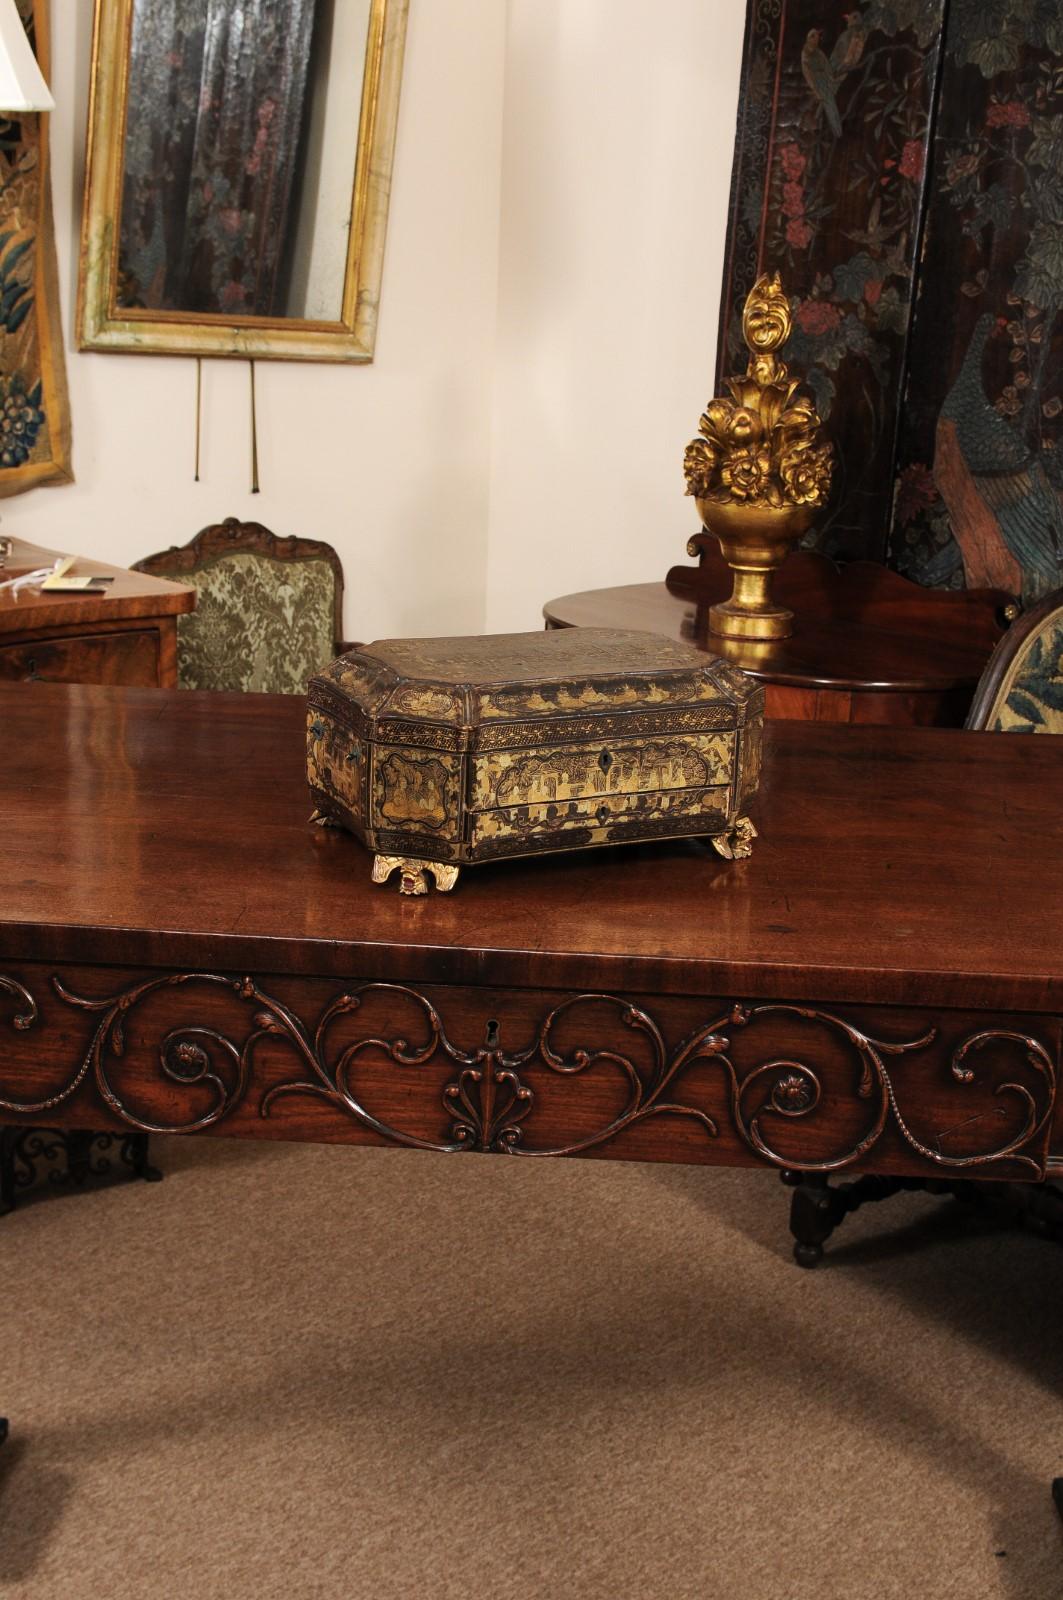 The 19th century chinoiserie sewing box with fitted interior, drawer and dragon gilt-wood carved feet.